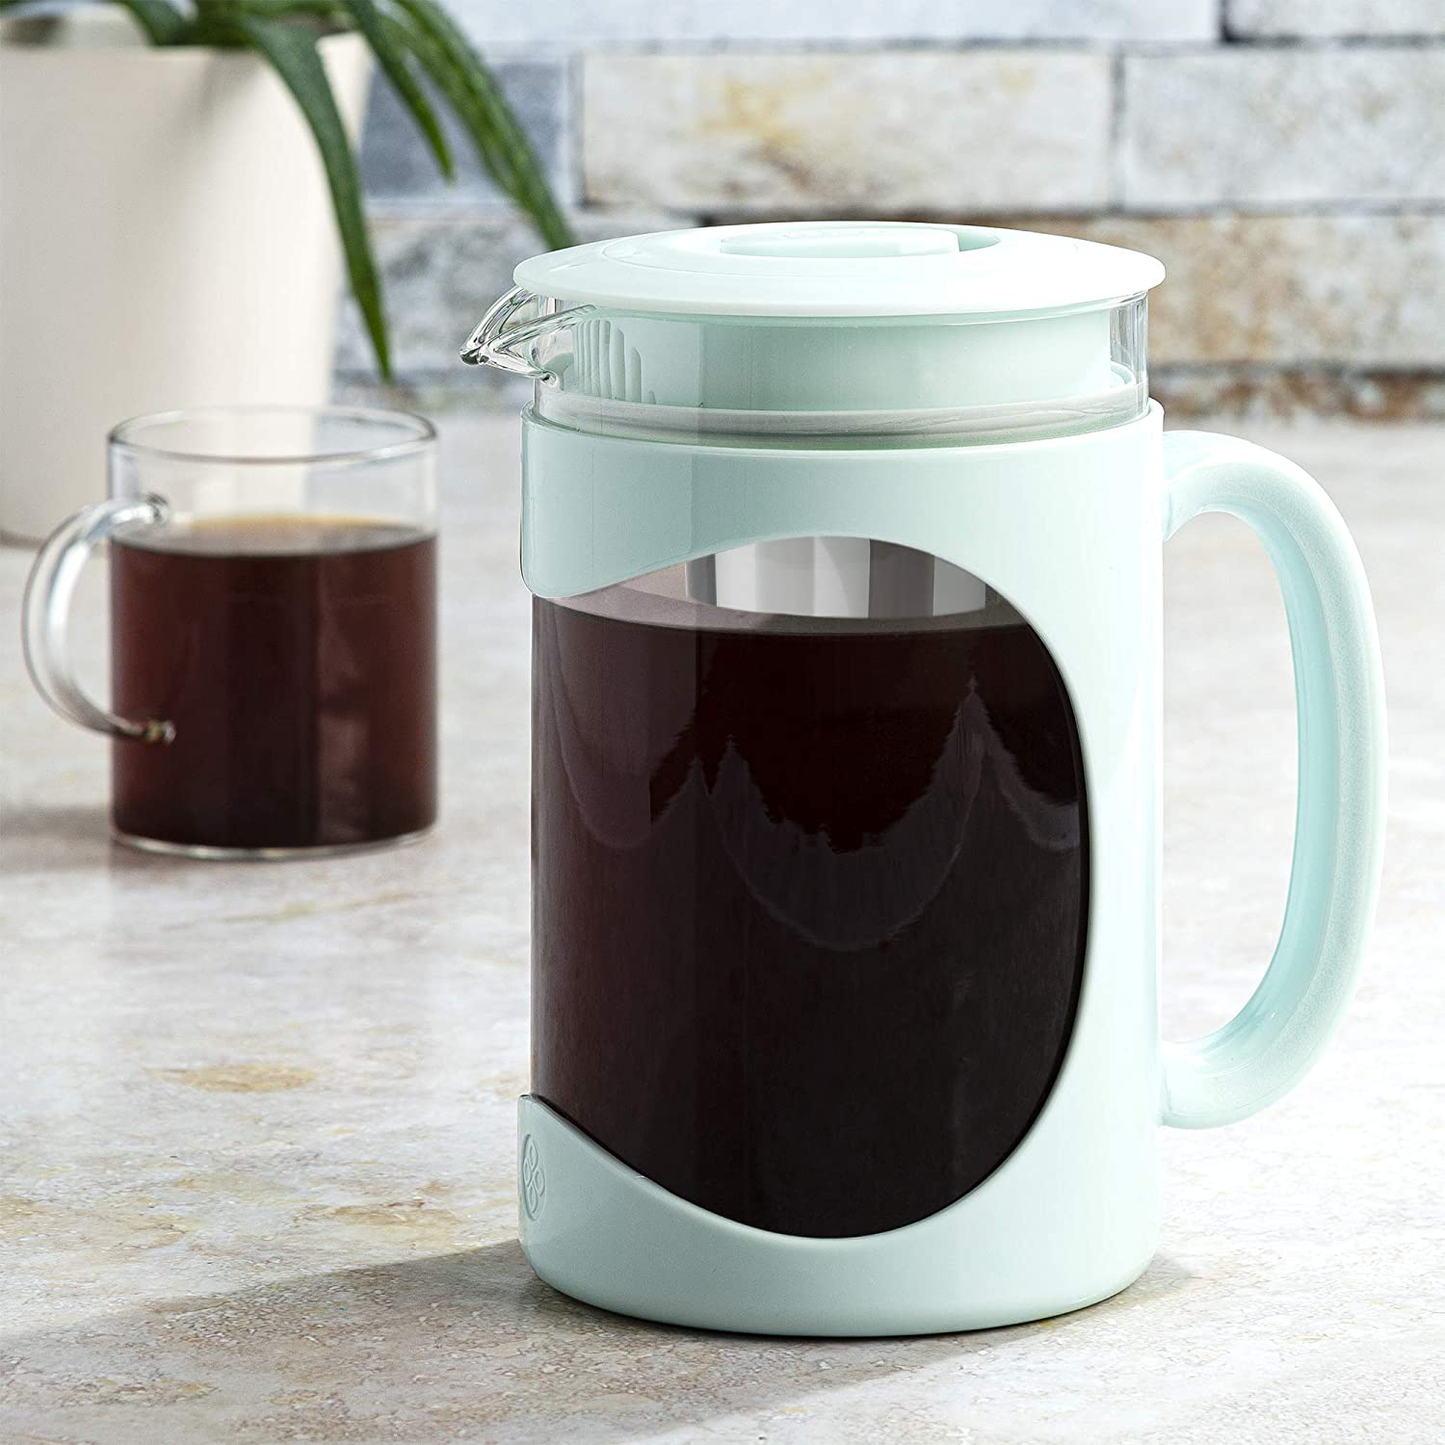 Primula Burke Deluxe Cold Brew Iced Coffee Maker, Comfort Grip Handle, Durable Glass Carafe, Removable Mesh Filter, Perfect 6 Cup Size, Dishwasher Safe, 1.6 Qt, Red